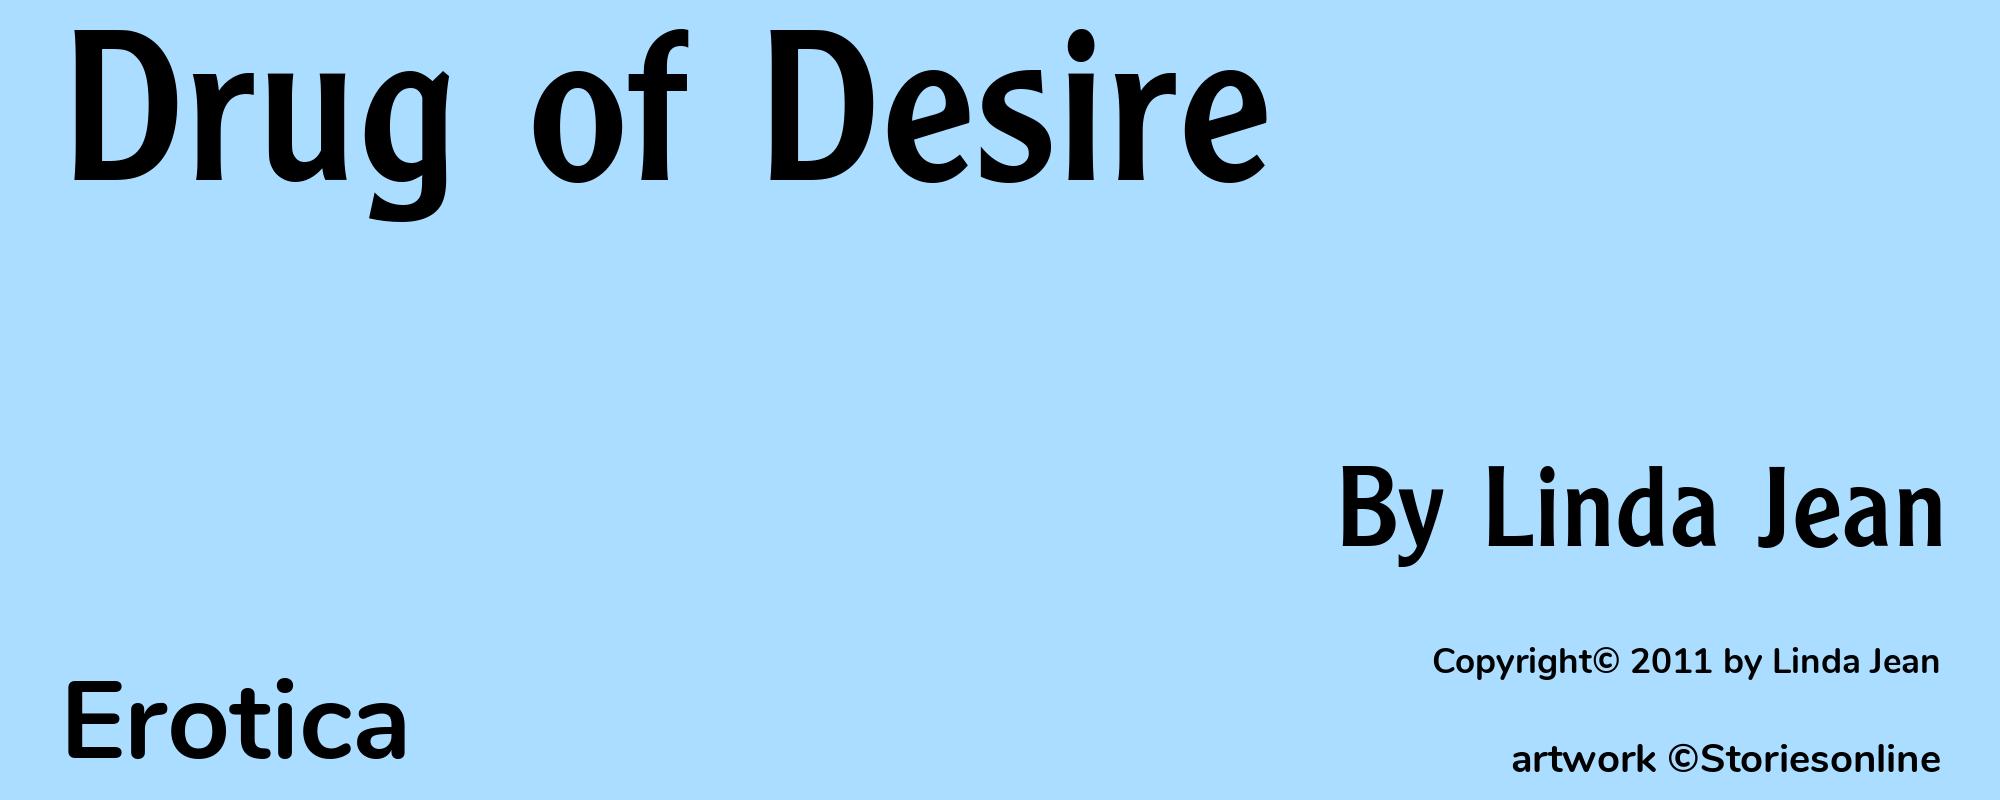 Drug of Desire - Cover